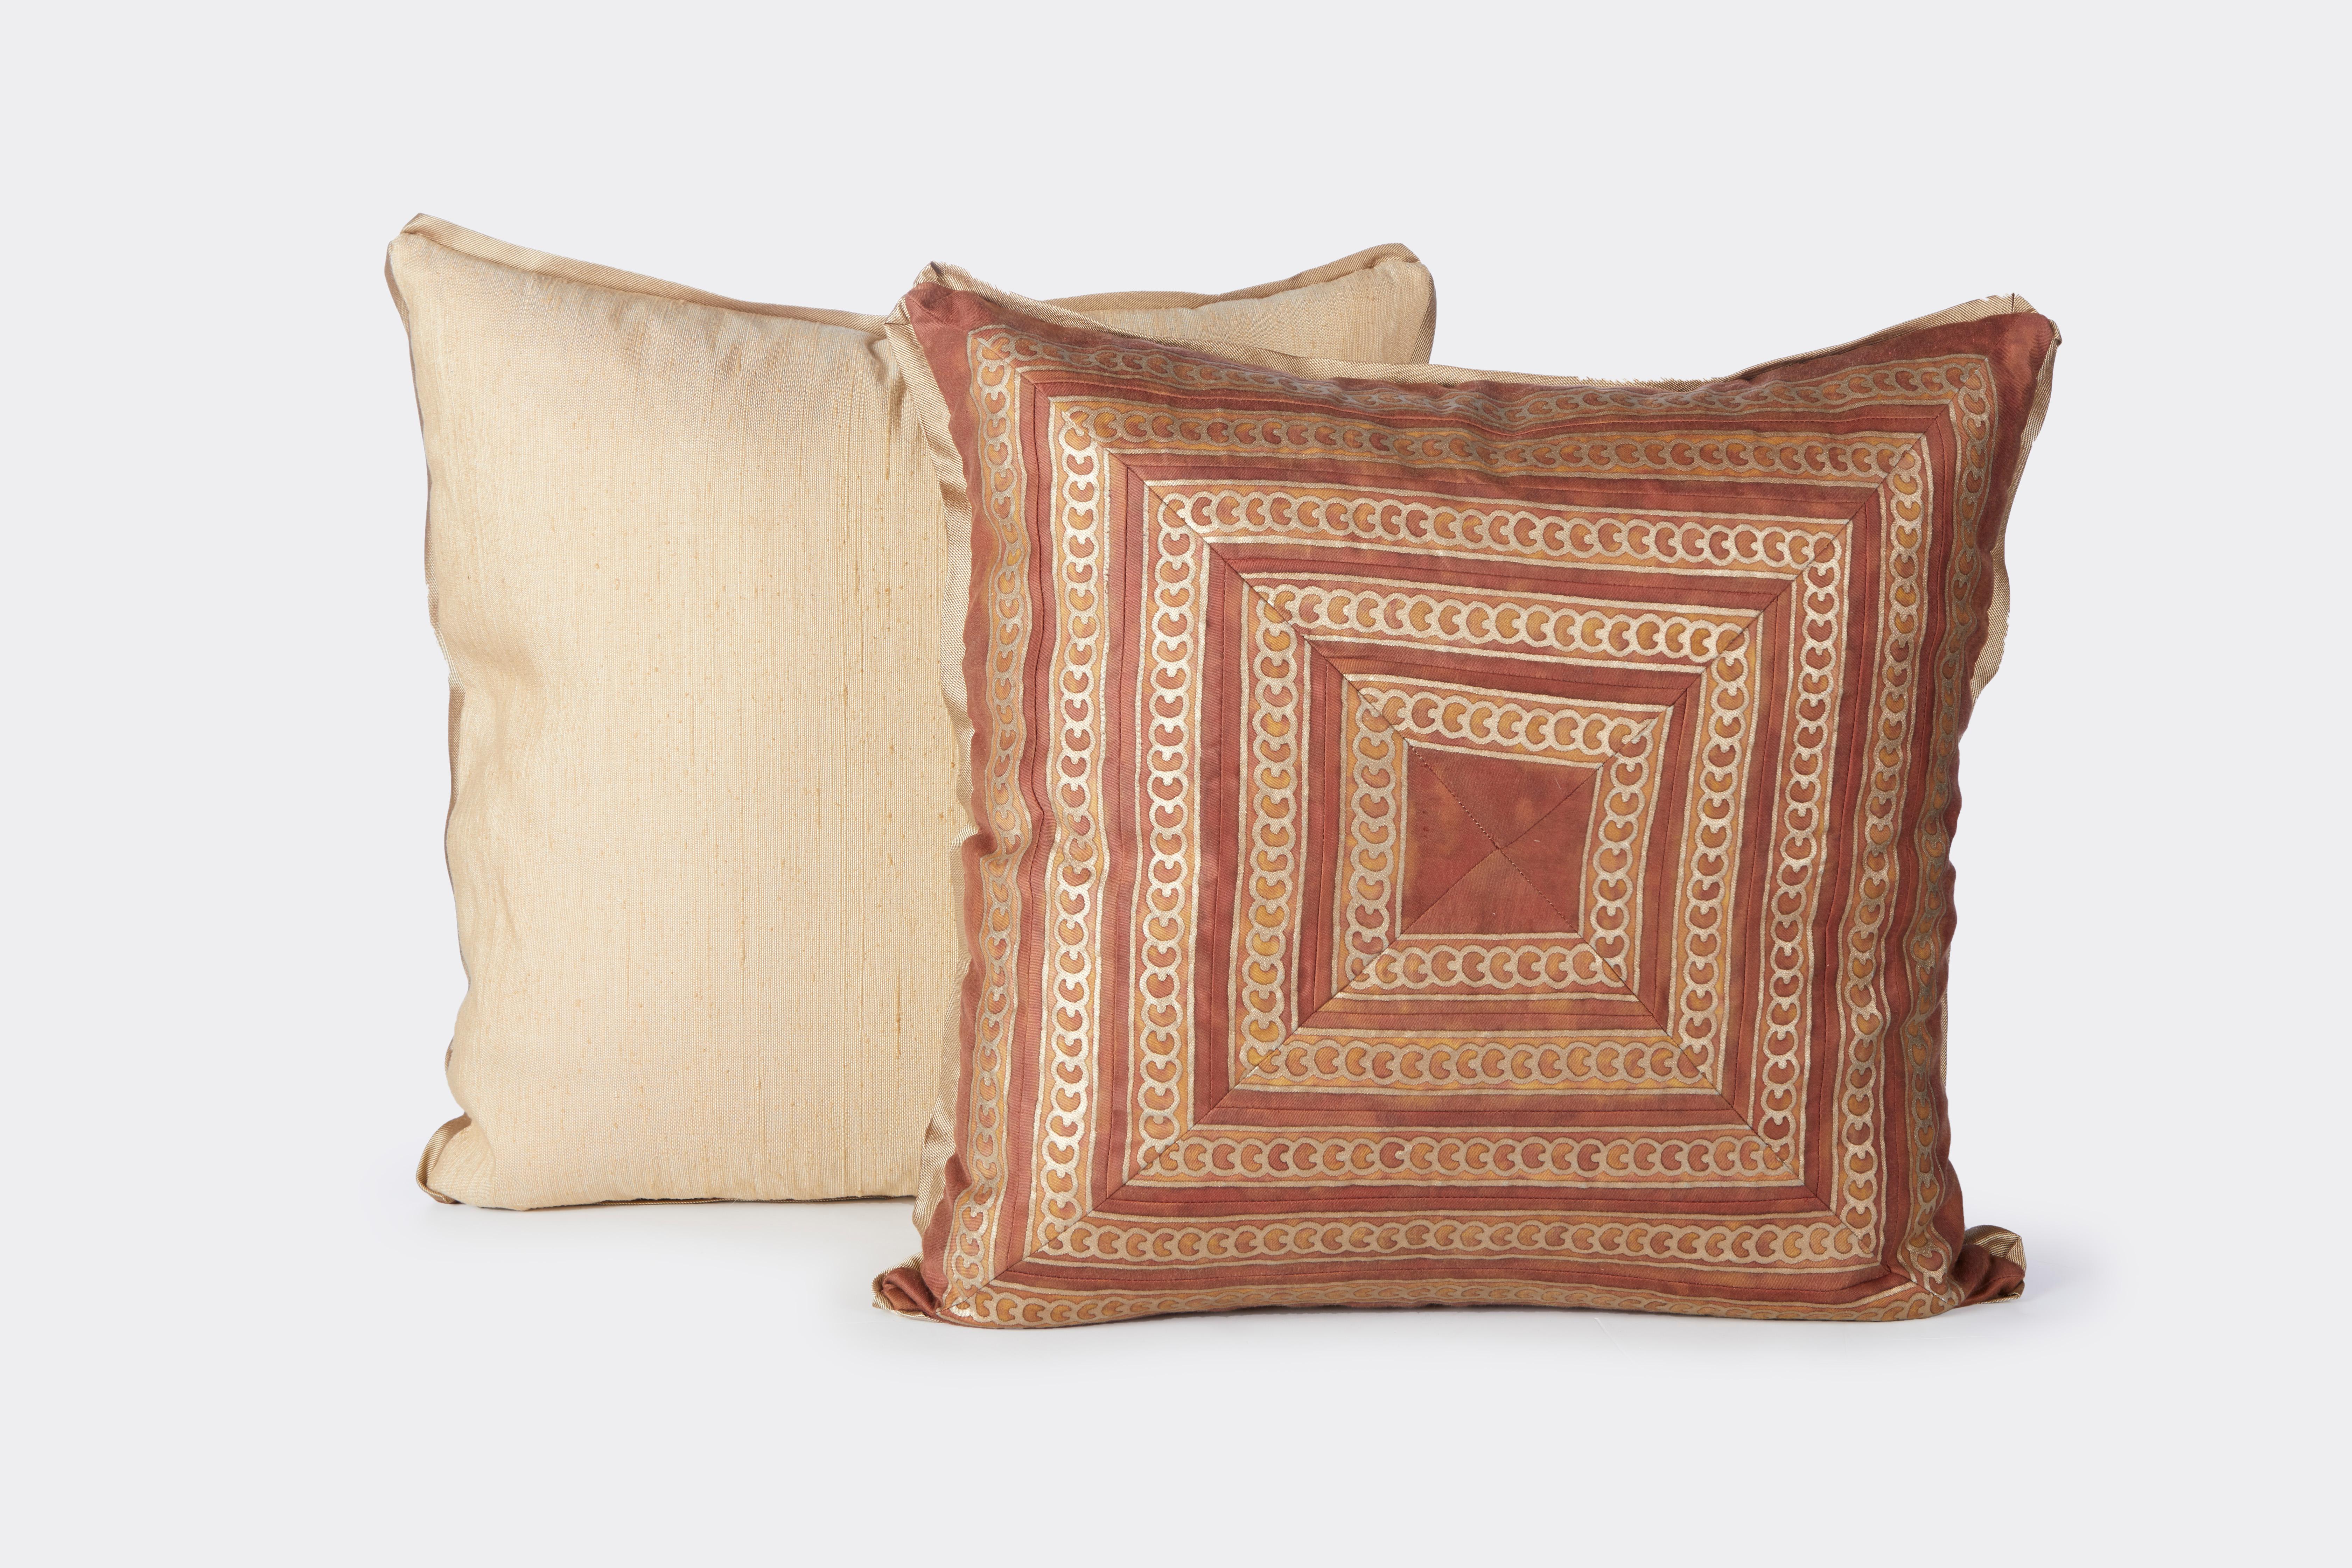 American Pair of Fortuny Cushions with Border Pieced and Mitered by David Duncan Studio For Sale